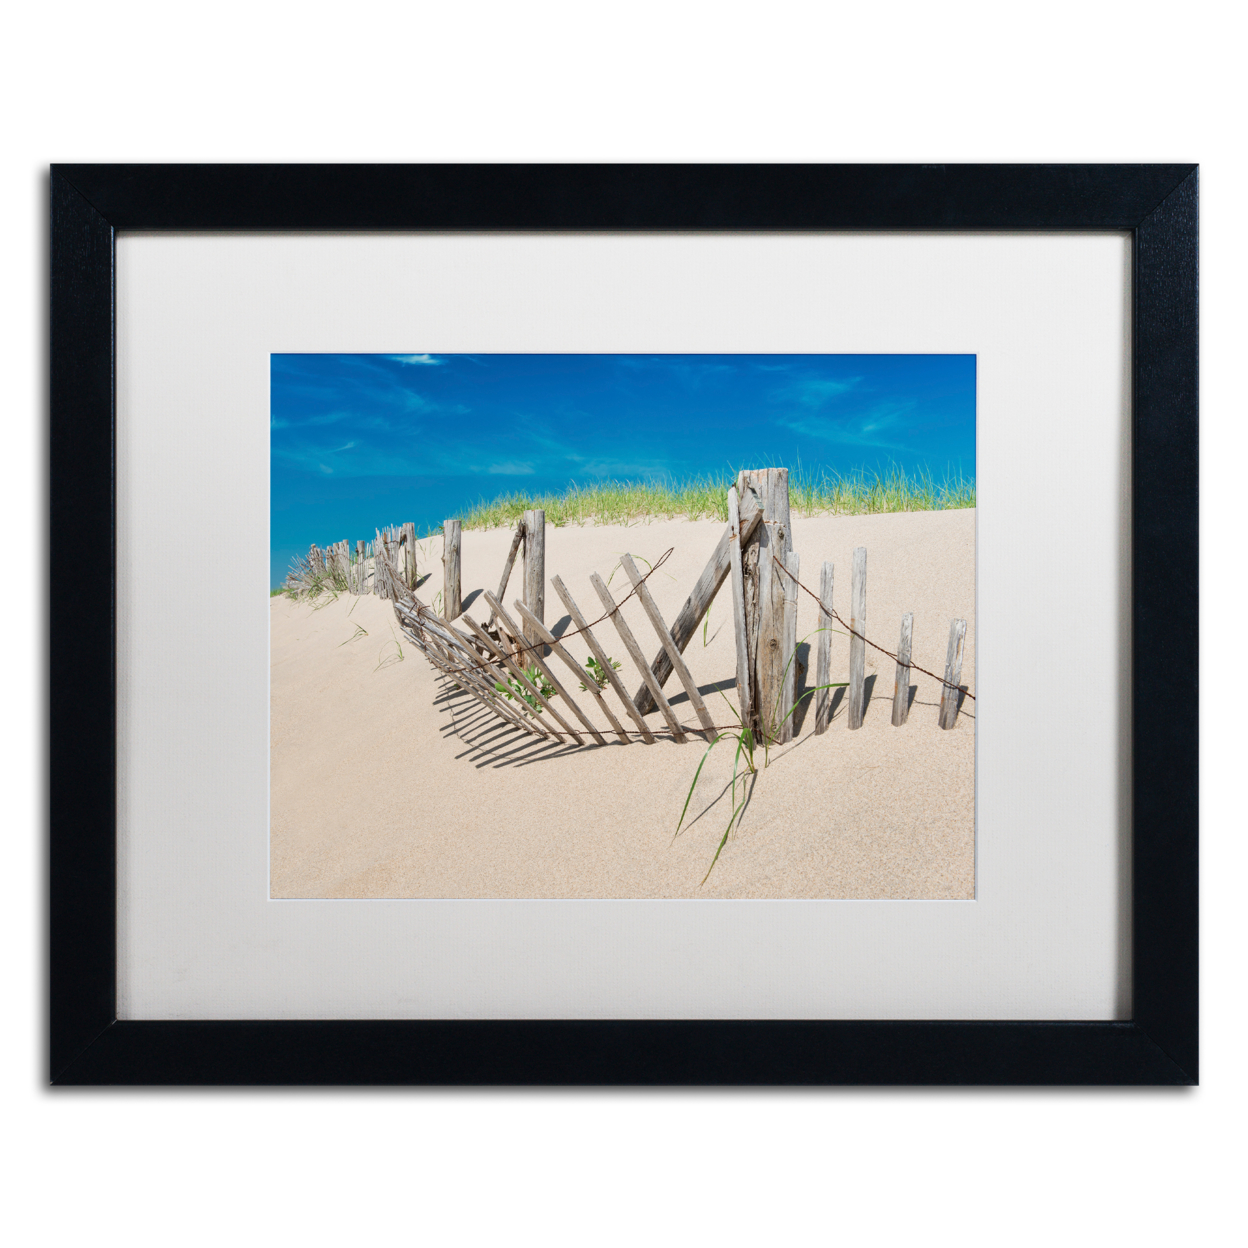 Michael Blanchette Photography 'Worn Beach Fence' Black Wooden Framed Art 18 X 22 Inches